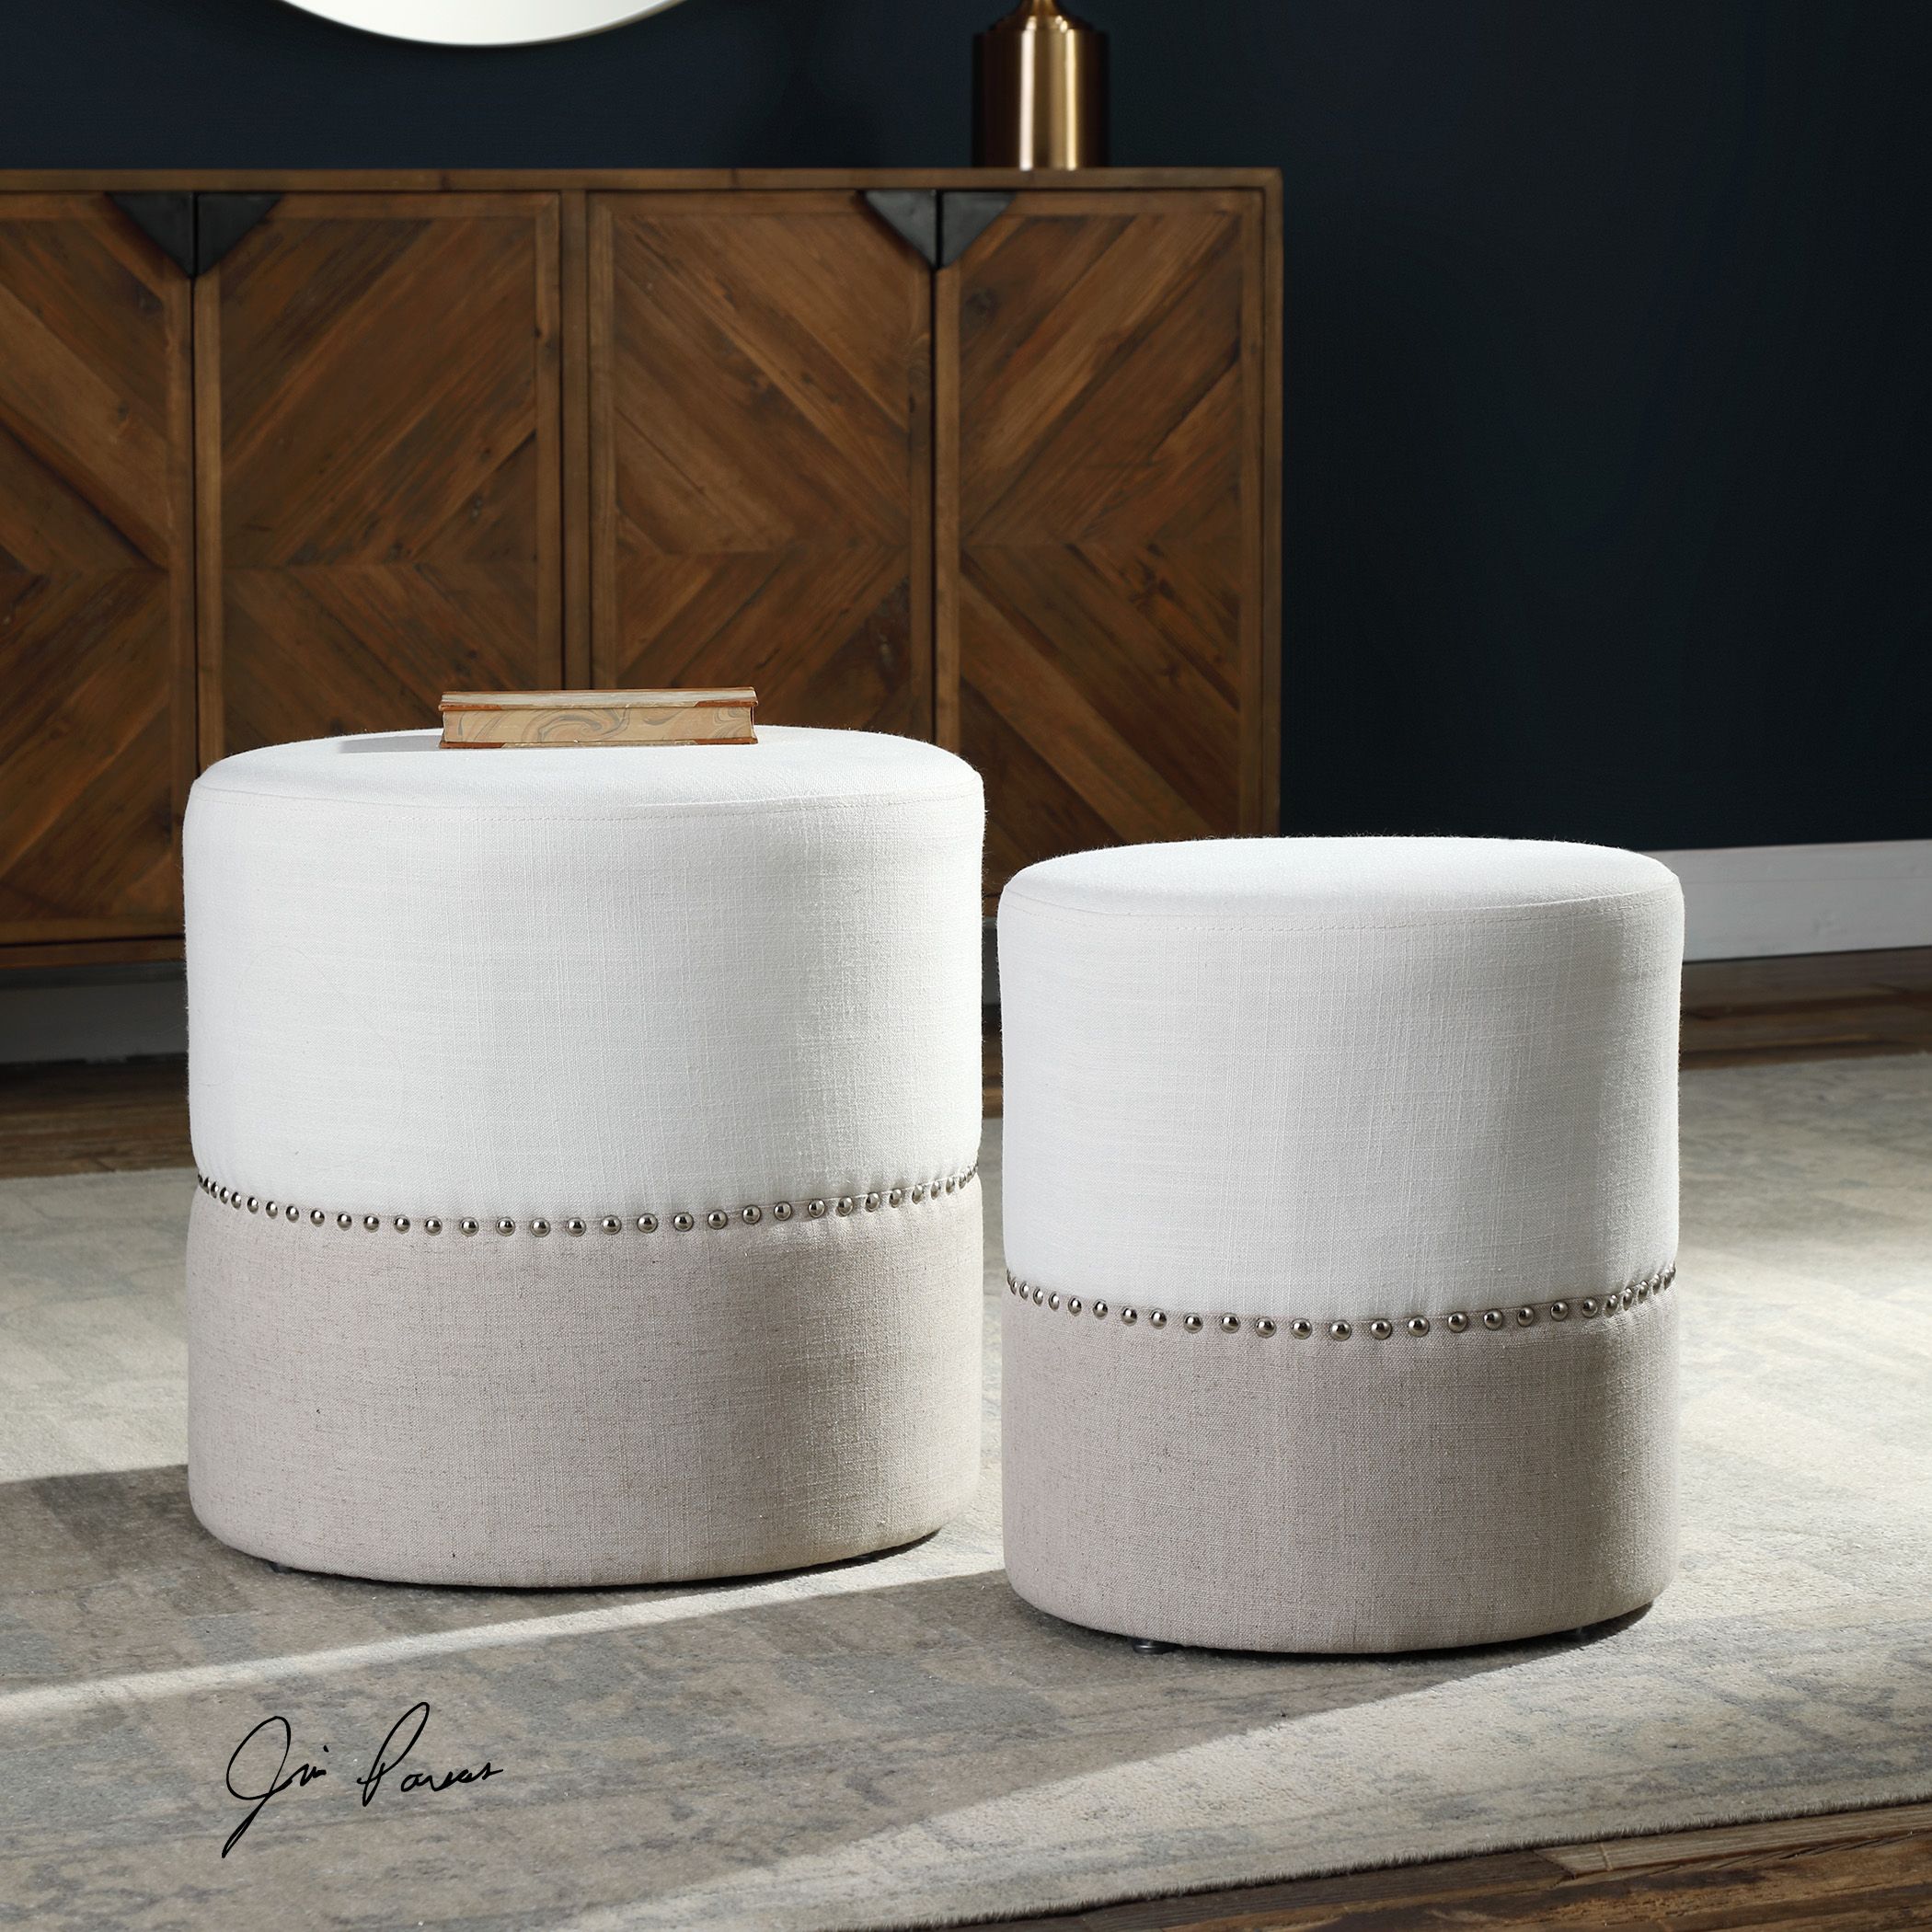 Tilda Two Toned Nesting Ottomans S/2 | Painted Fox Home In Beige Trellis Cylinder Pouf Ottomans (View 14 of 20)